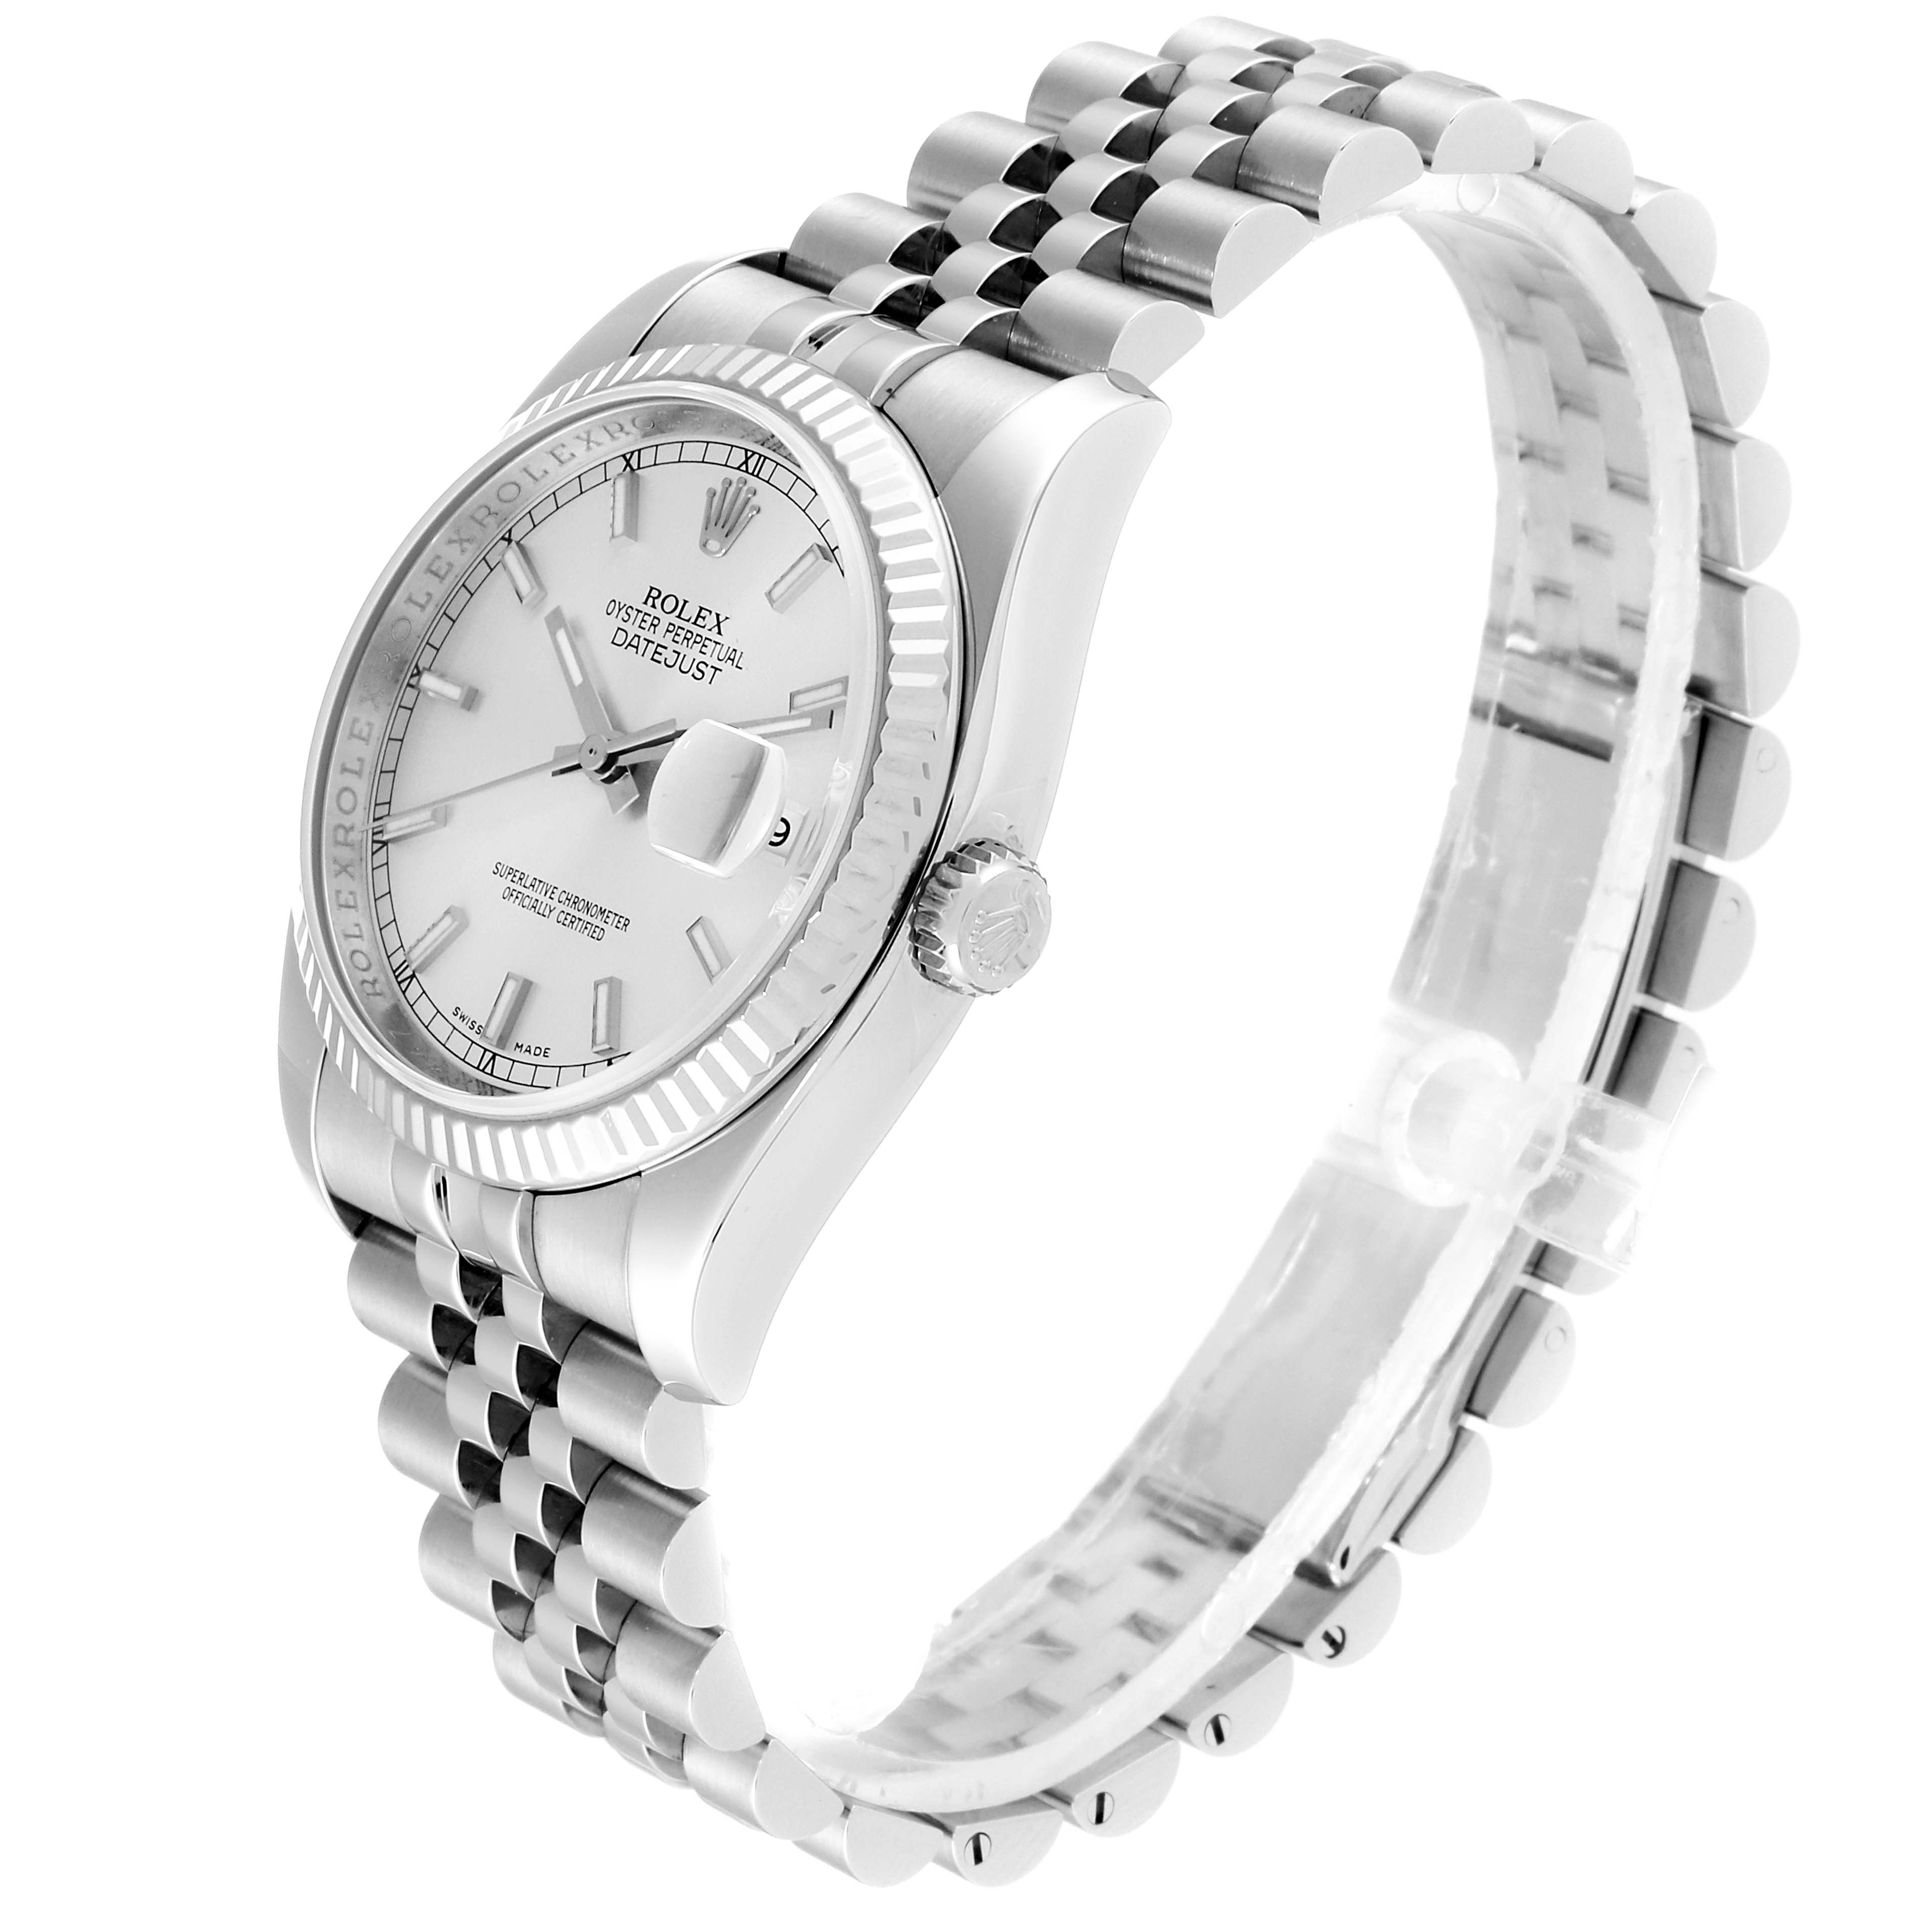 Rolex Datejust Steel White Gold Silver Dial Mens Watch 116234 Box Card ...